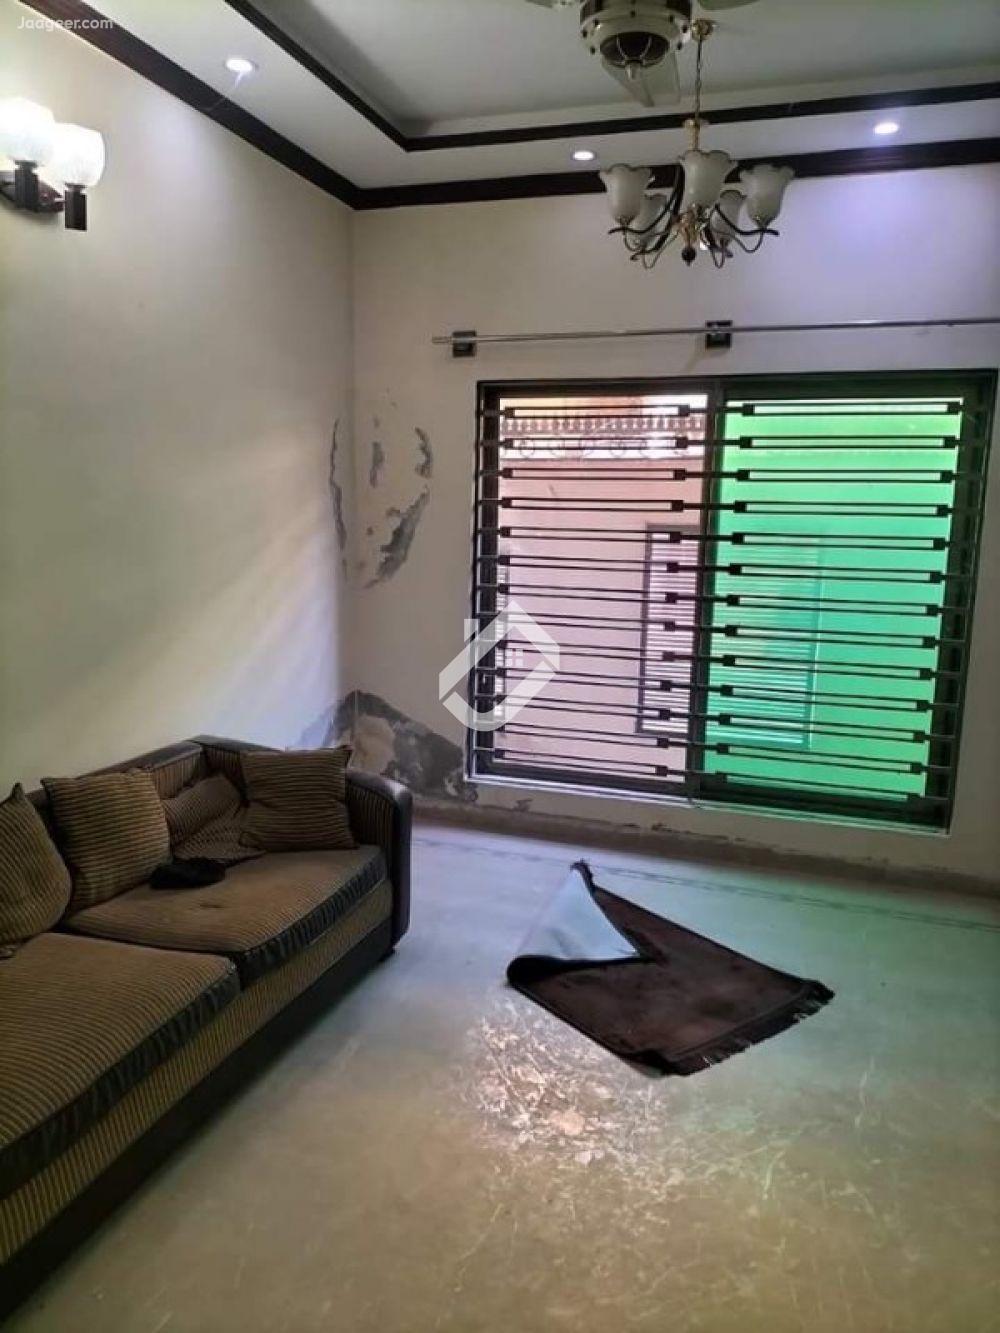 View  5 Marla Lower Portion Furnished House For Rent In Ghauri Town  in Ghauri Town, Islamabad